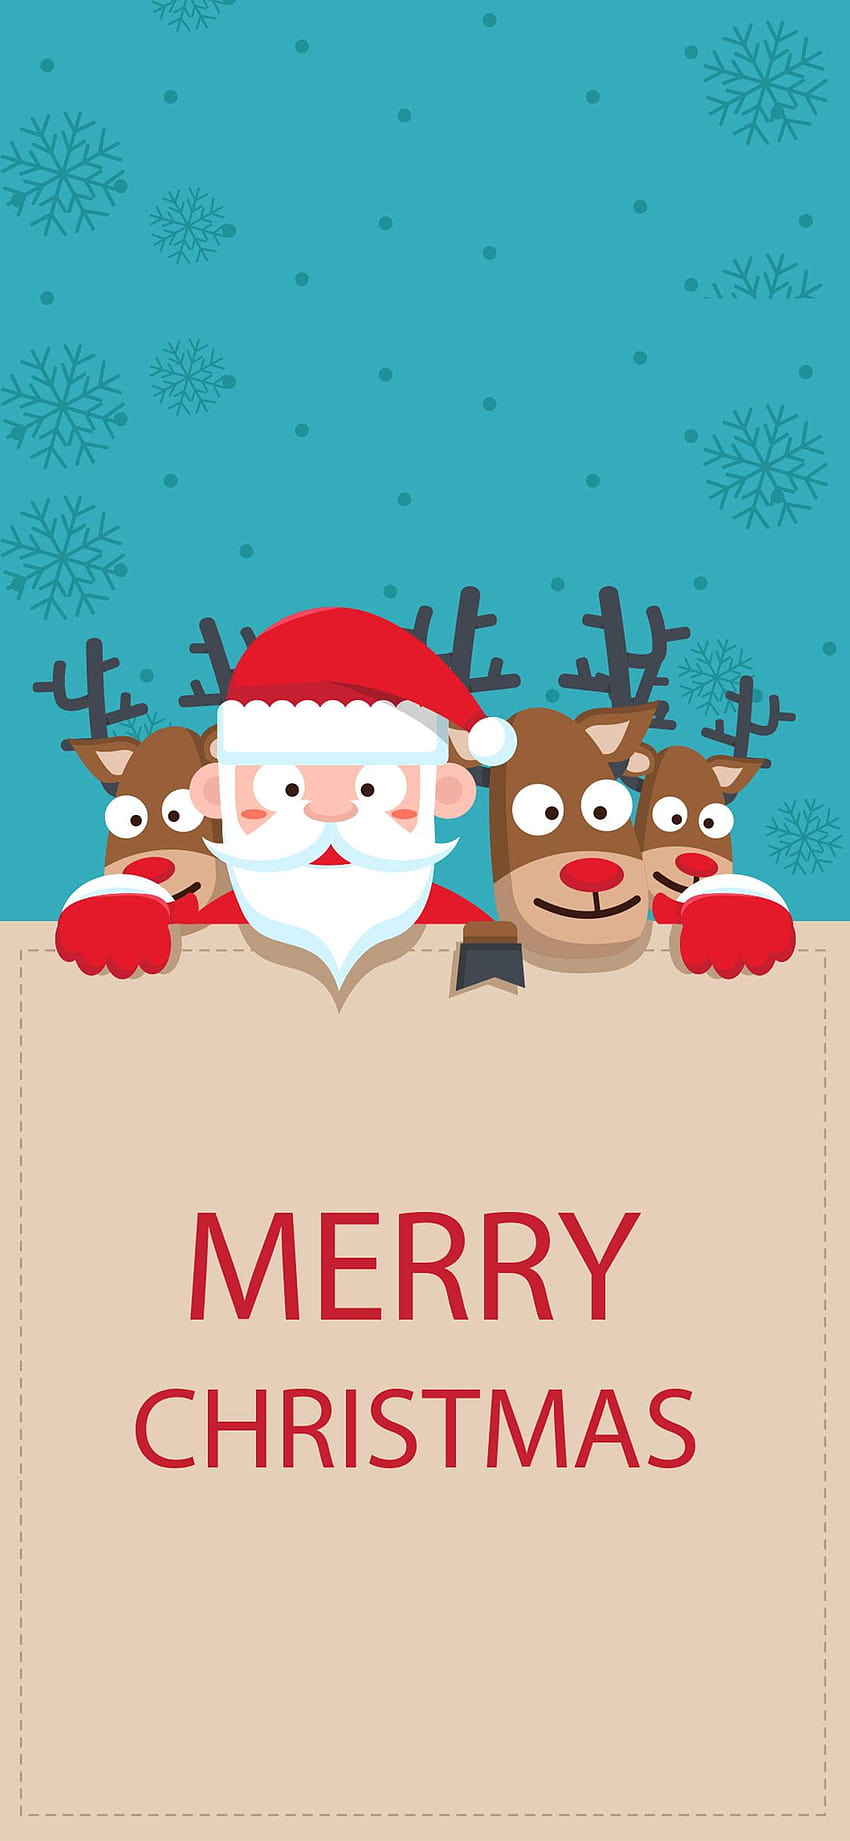 2018/2019 Christmas for iPhone 6/7/8/SE/X/XS/XR, merry christmas ...